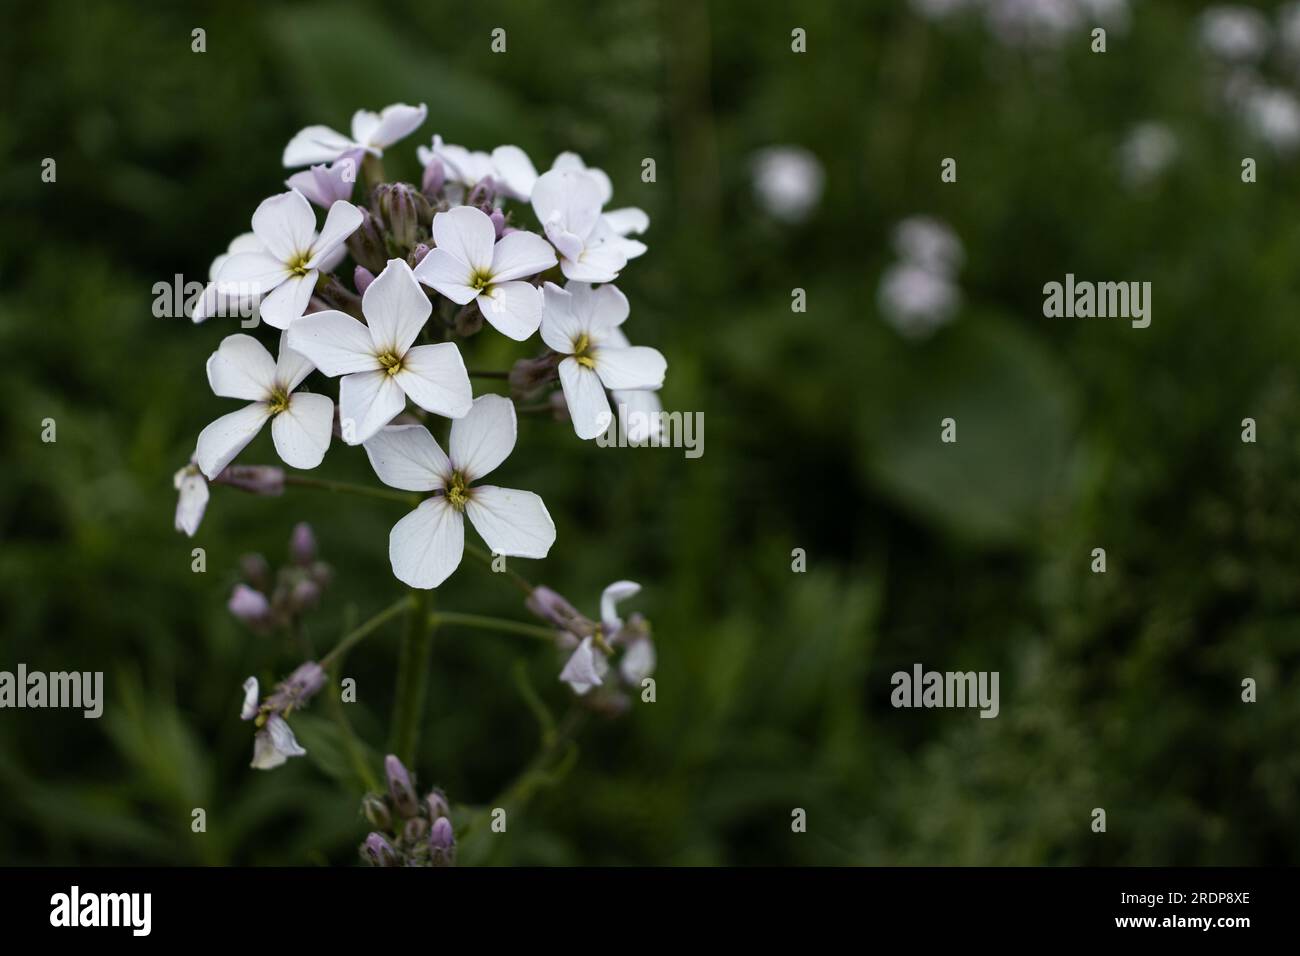 Cluster of white flowers with yellow centers growing on a green plant with small leaves - blurred green garden background Stock Photo